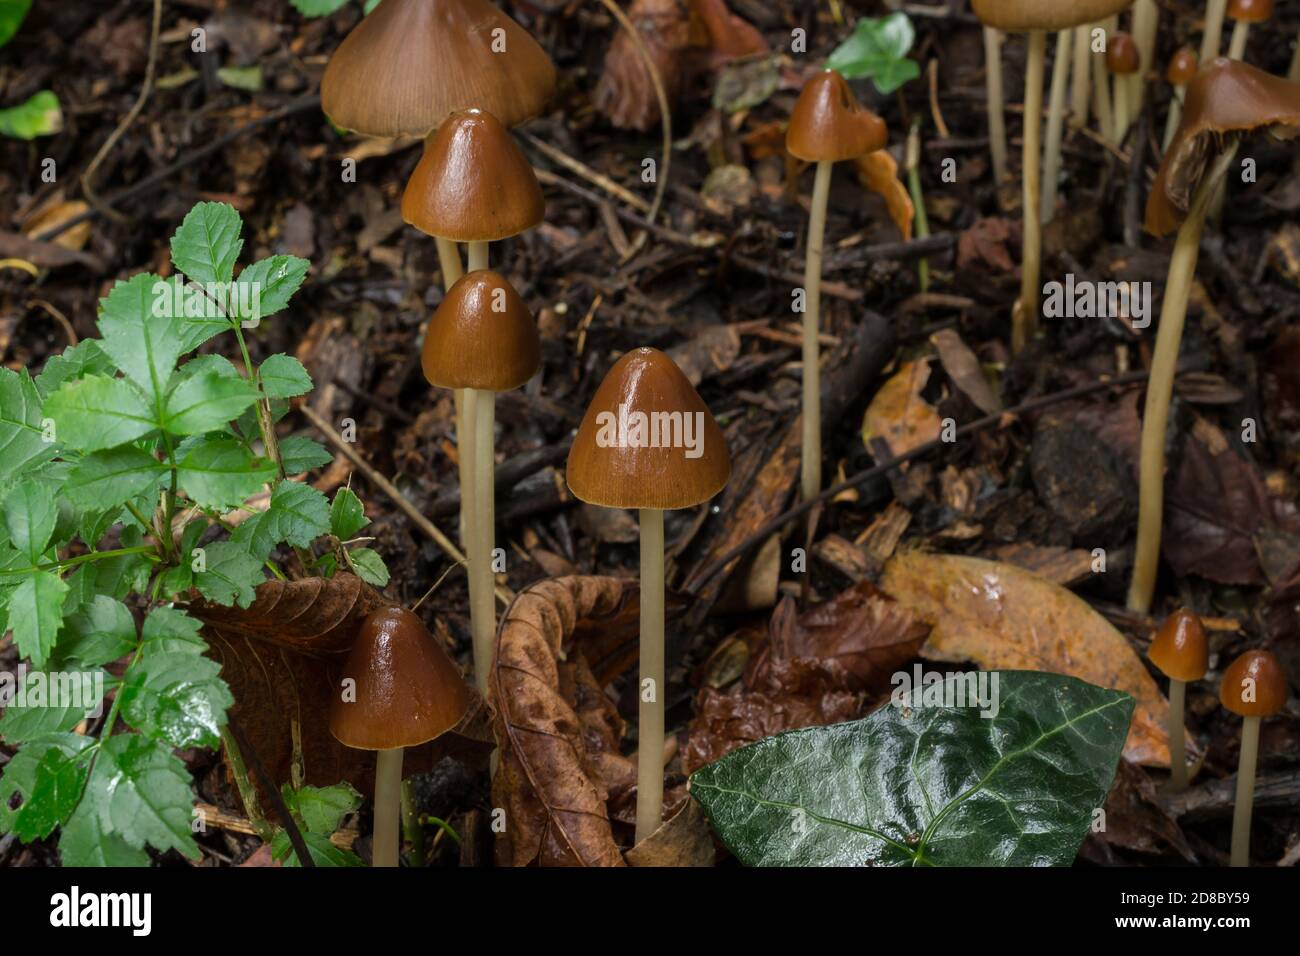 A group of liberty cap mushrooms or psilocybe semilanceata growing in October woodland. Stock Photo